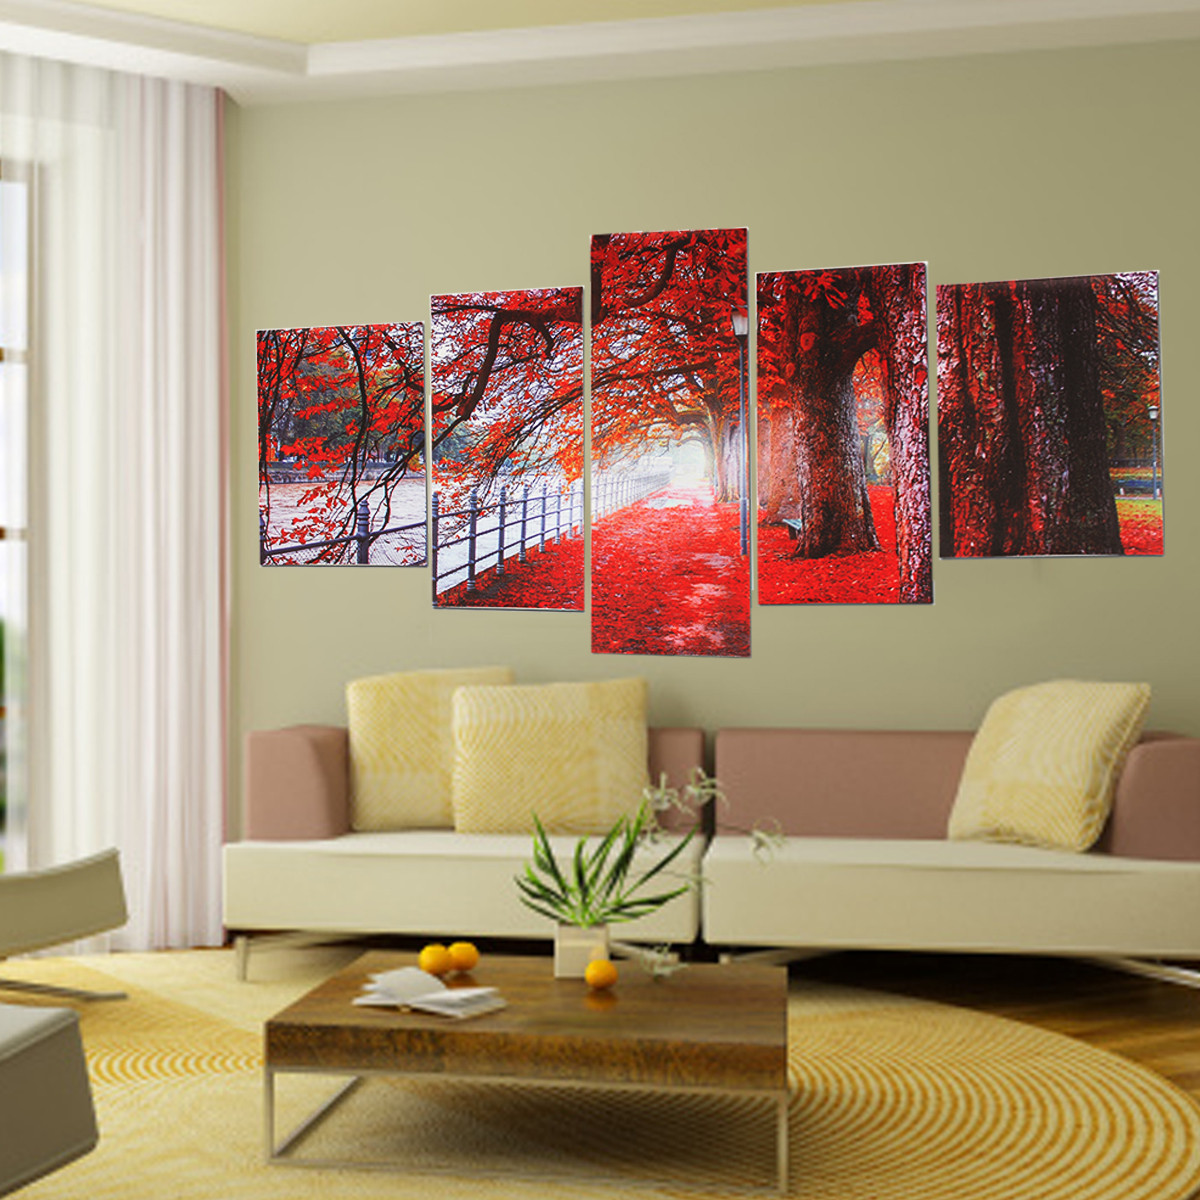 5Pcs-Red-Falling-Leaves-Canvas-Painting-Autumn-Tree-Wall-Decorative-Print-Art-Pictures-Unframed-Wall-1809936-3